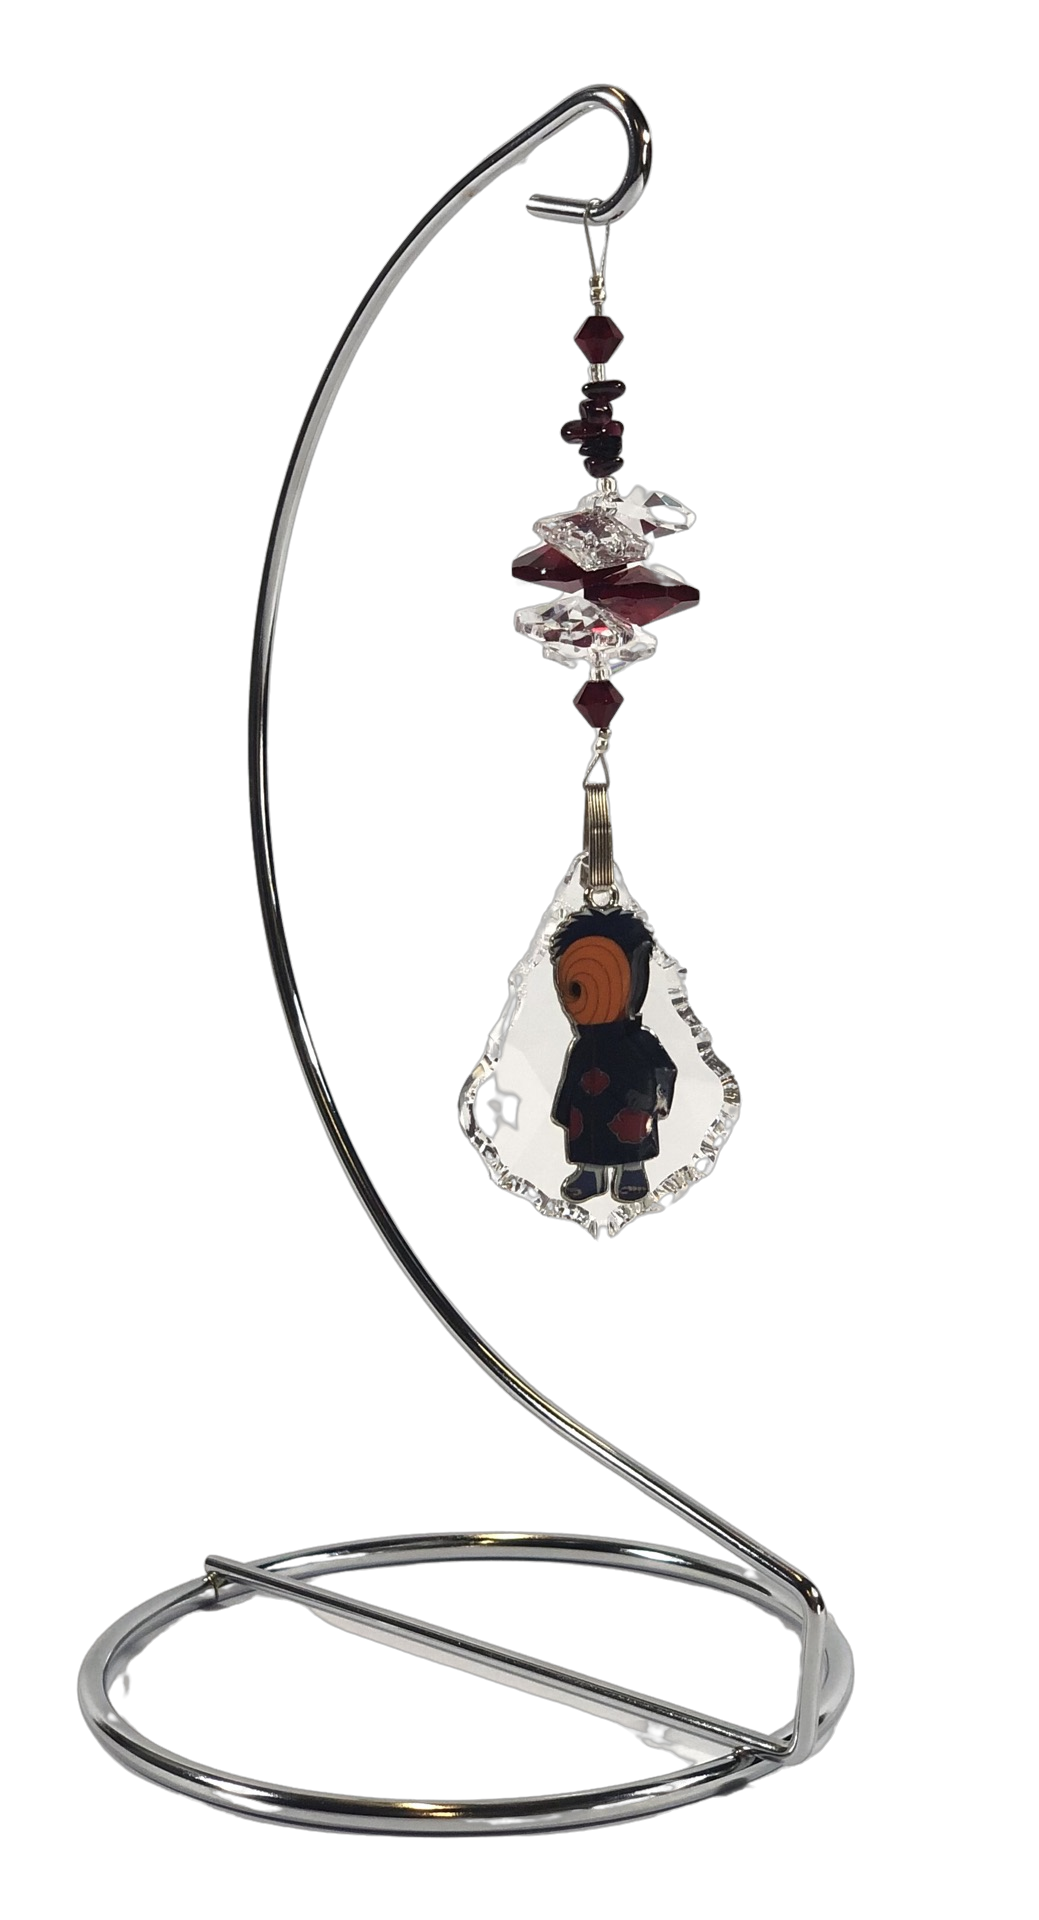 Naruto - The Good Boy crystal suncatcher is decorated with garnet gemstones and come on this amazing stand.